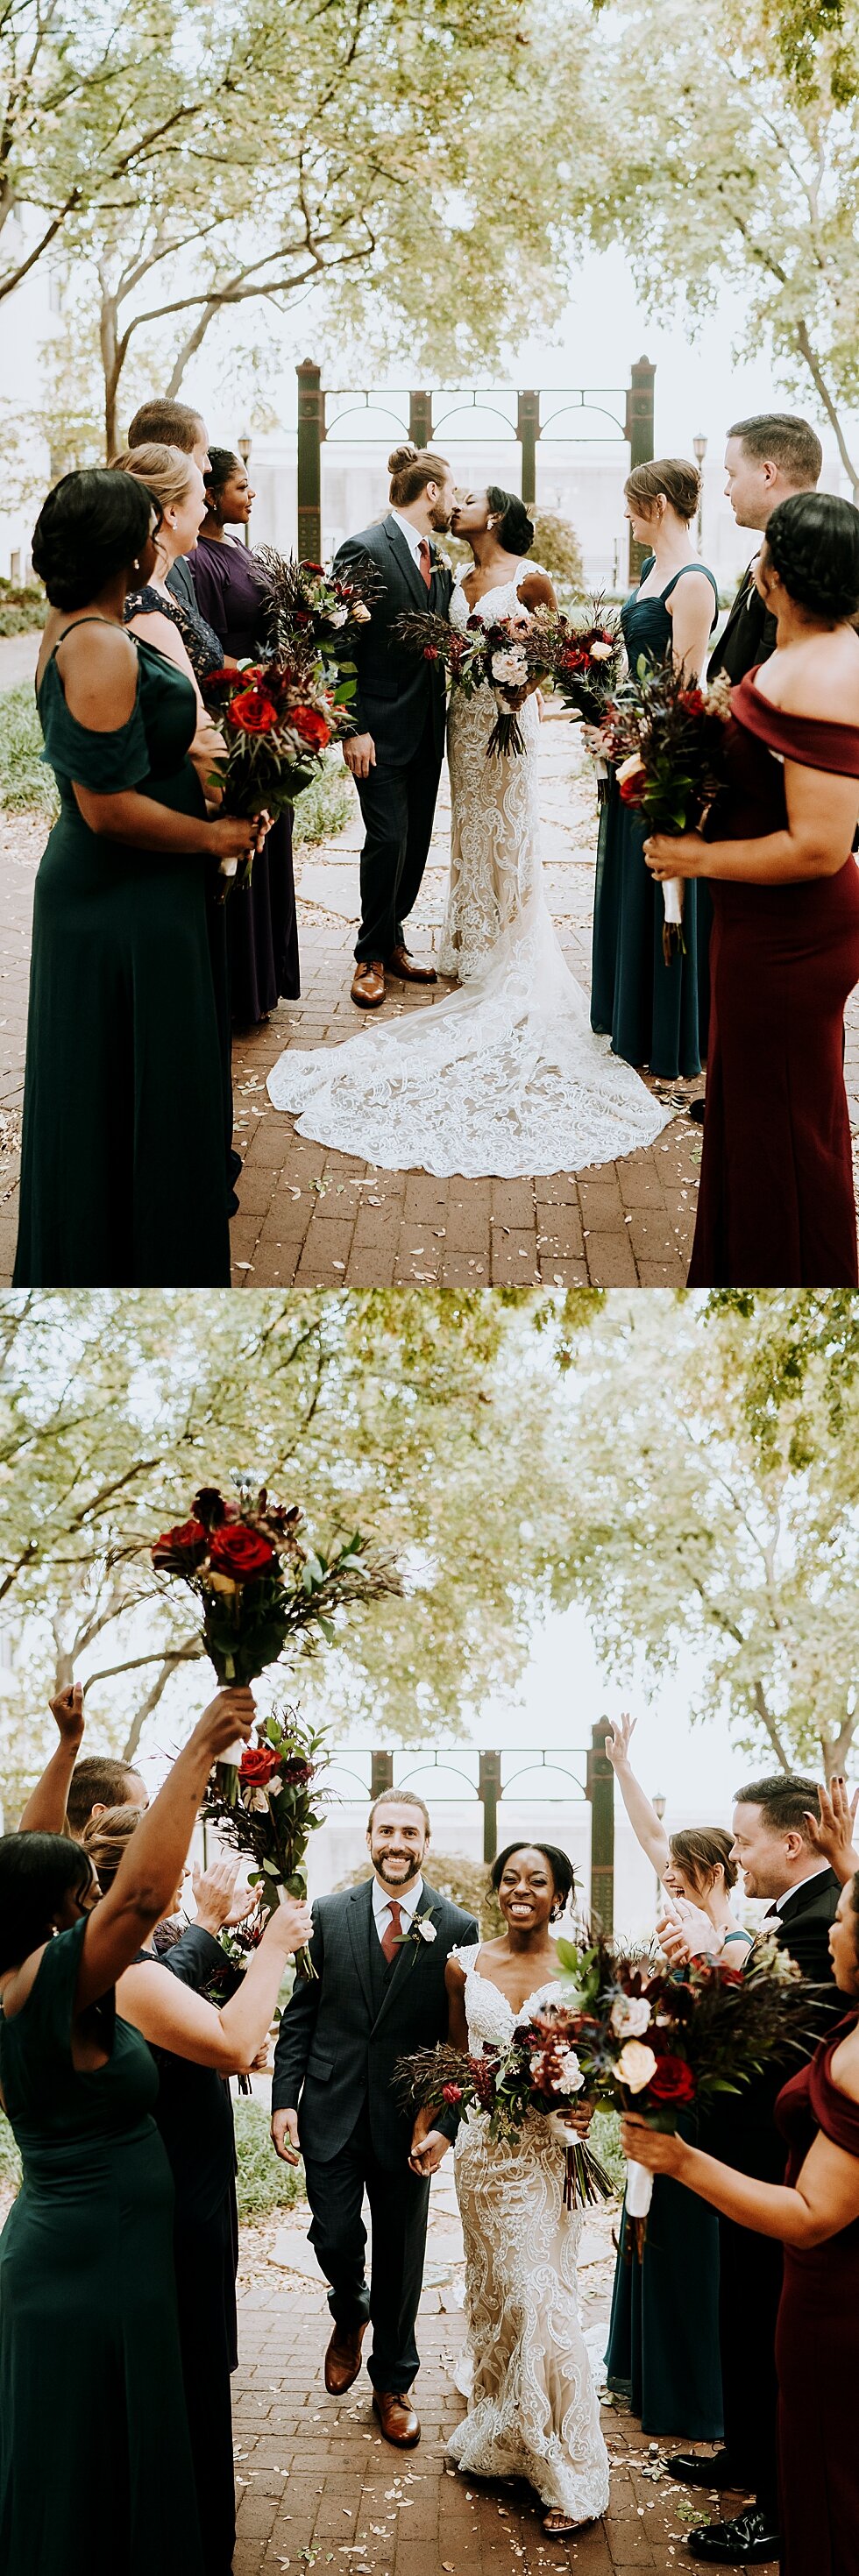  These jewel tones of emerald green, deep plum, peacock and burgundy worked so well together! What a great combination! #weddinggoals #weddingphotographer #married #ceremonyandreception #indianaphotographer #louisvillephotographer #weddingphotos #hus